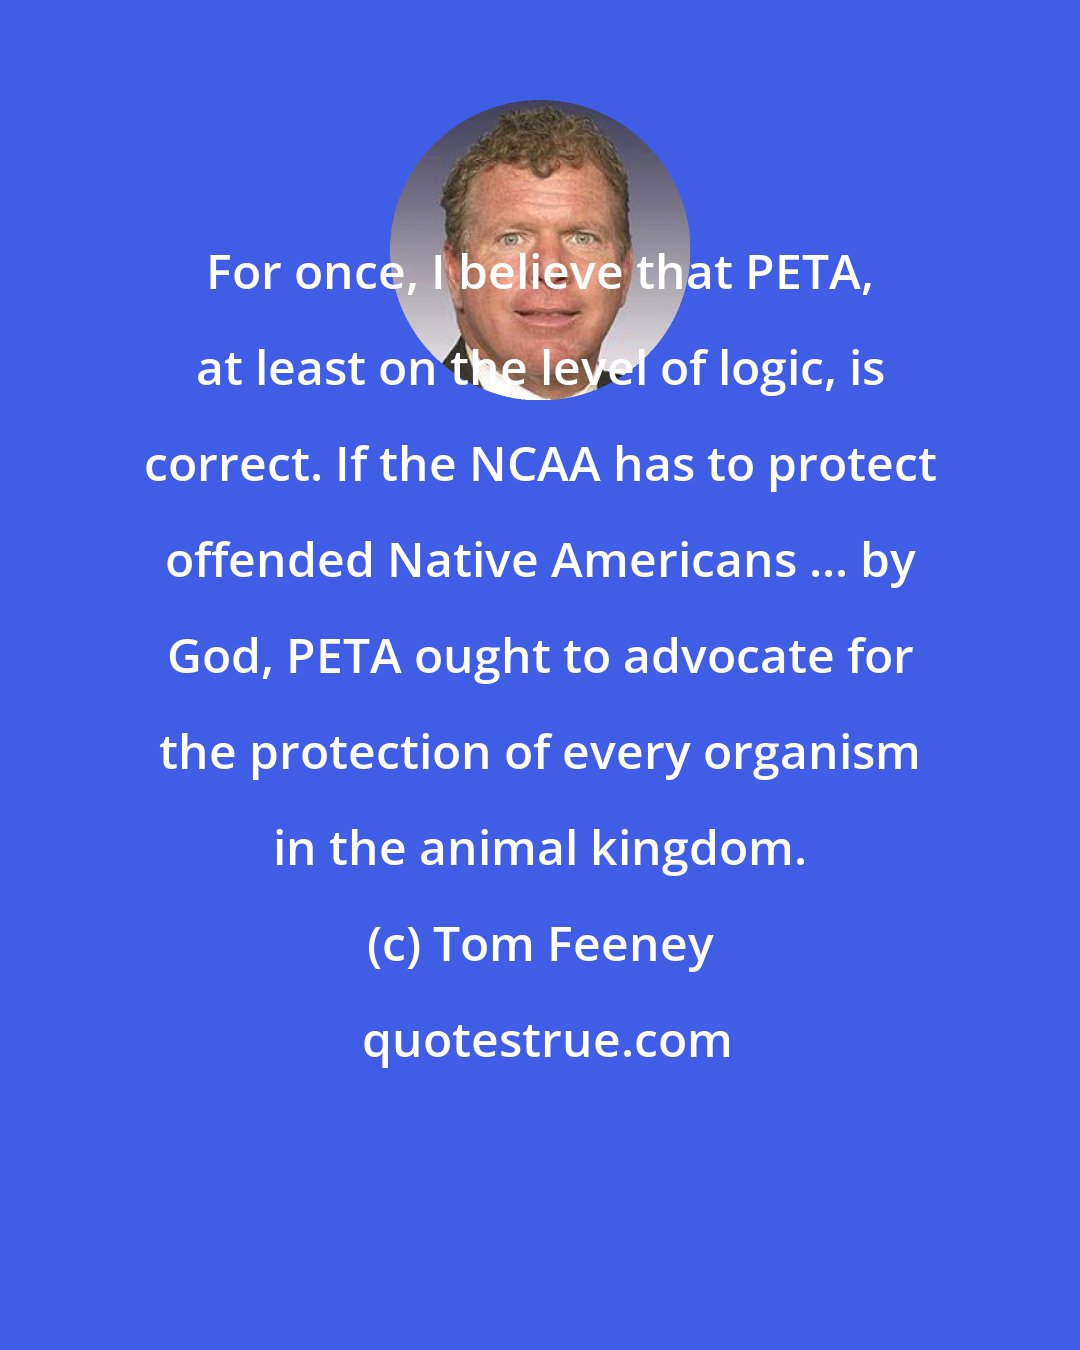 Tom Feeney: For once, I believe that PETA, at least on the level of logic, is correct. If the NCAA has to protect offended Native Americans ... by God, PETA ought to advocate for the protection of every organism in the animal kingdom.